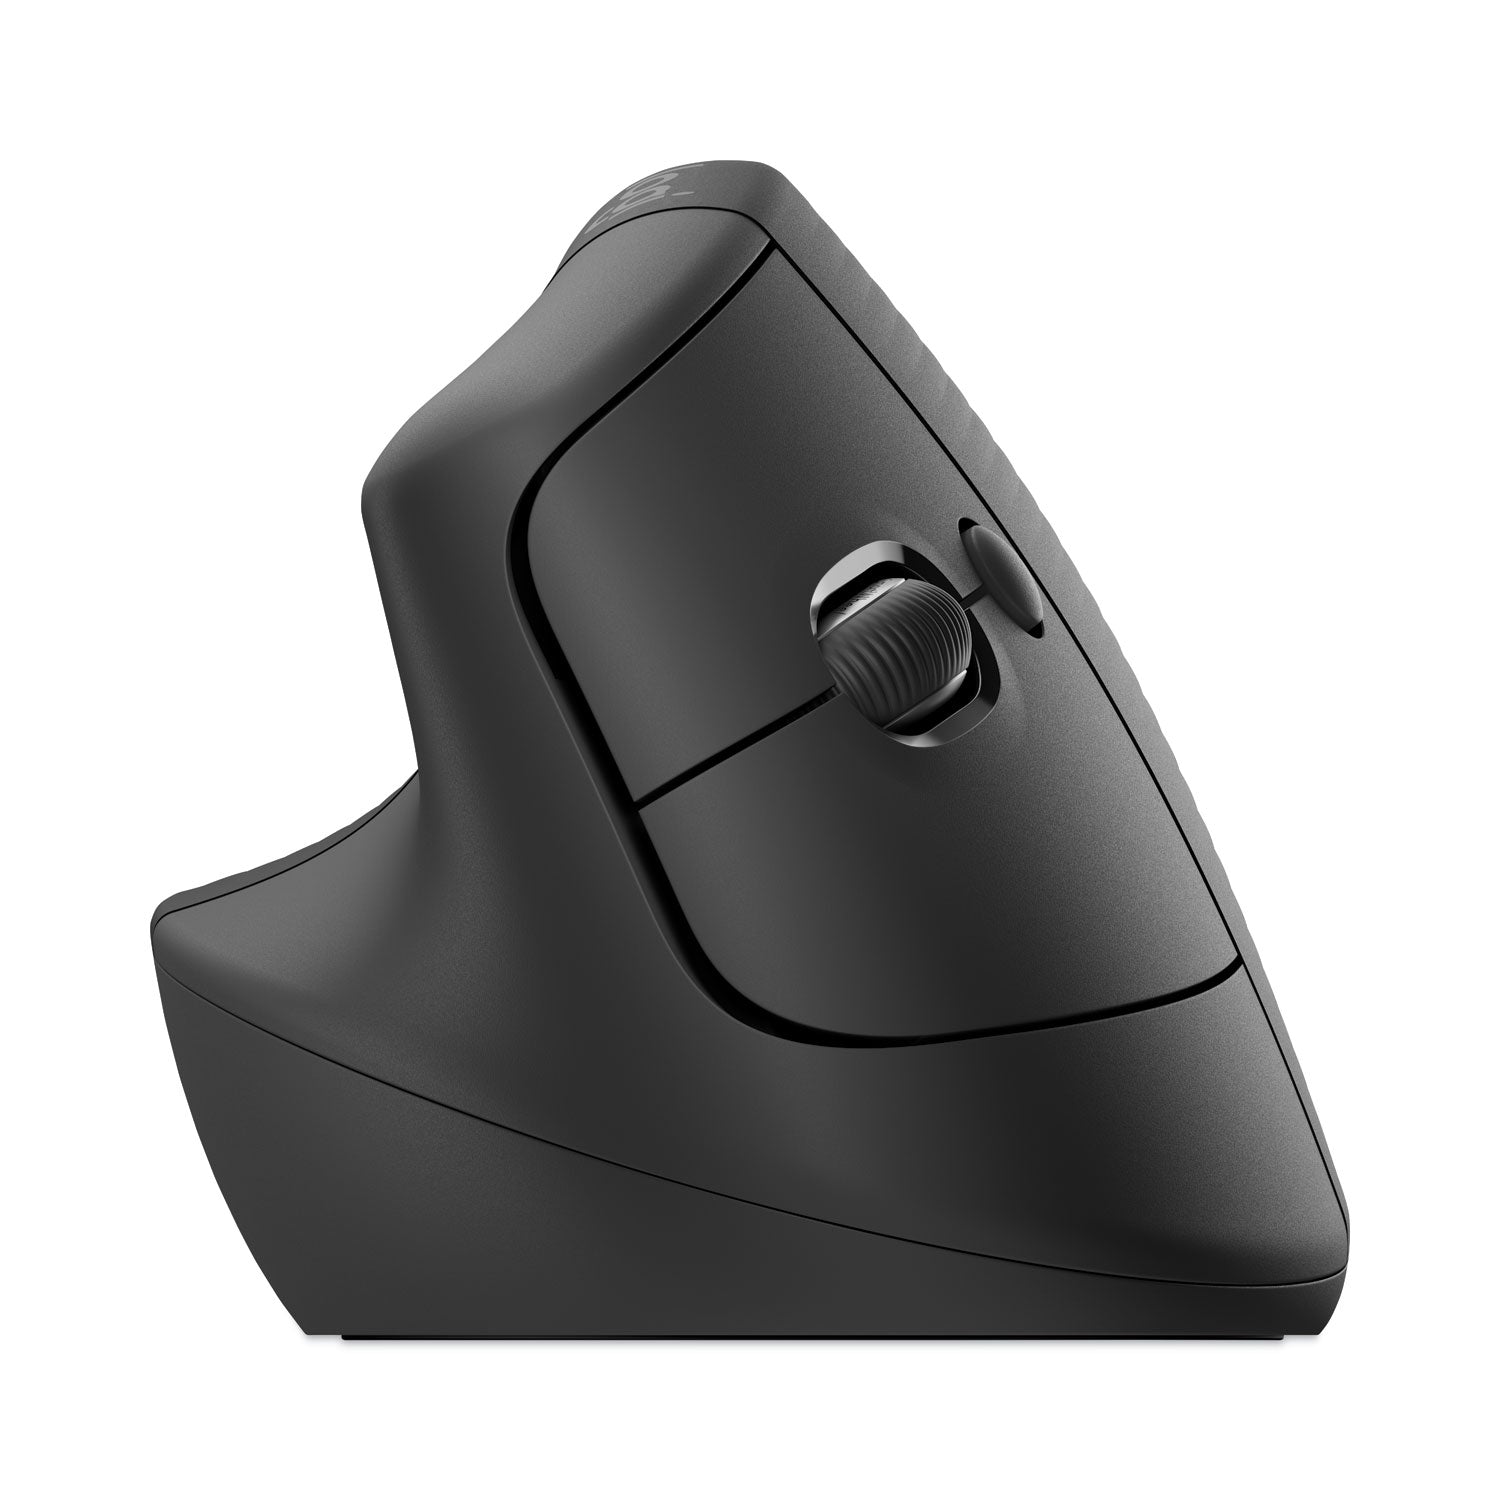 lift-vertical-ergonomic-mouse-24-ghz-frequency-32-ft-wireless-range-left-hand-use-graphite_log910006467 - 2